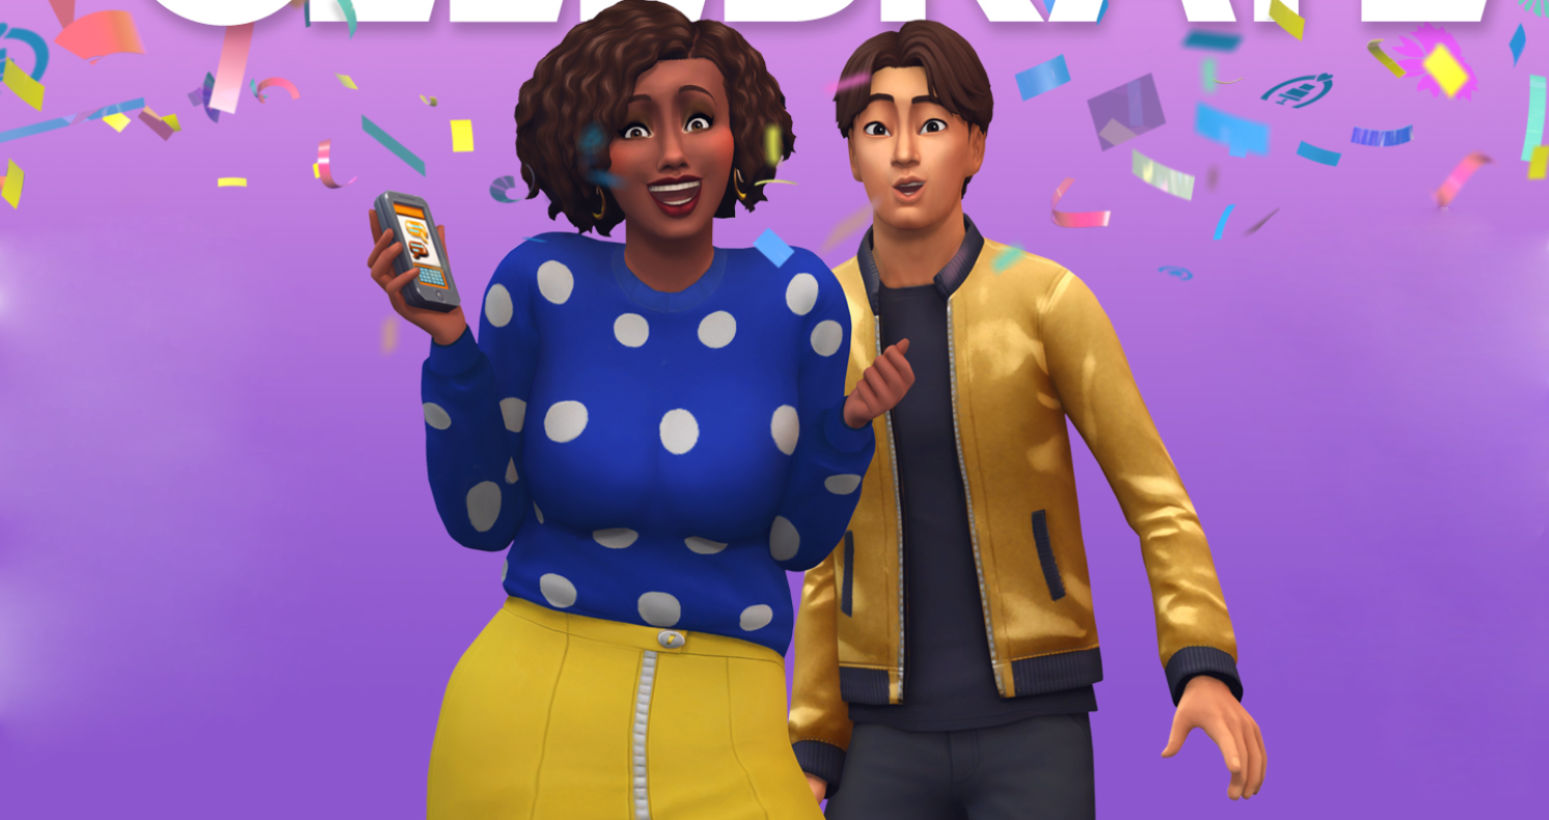 Sims 4: First Game Pack and new Kits confirmed for 2022